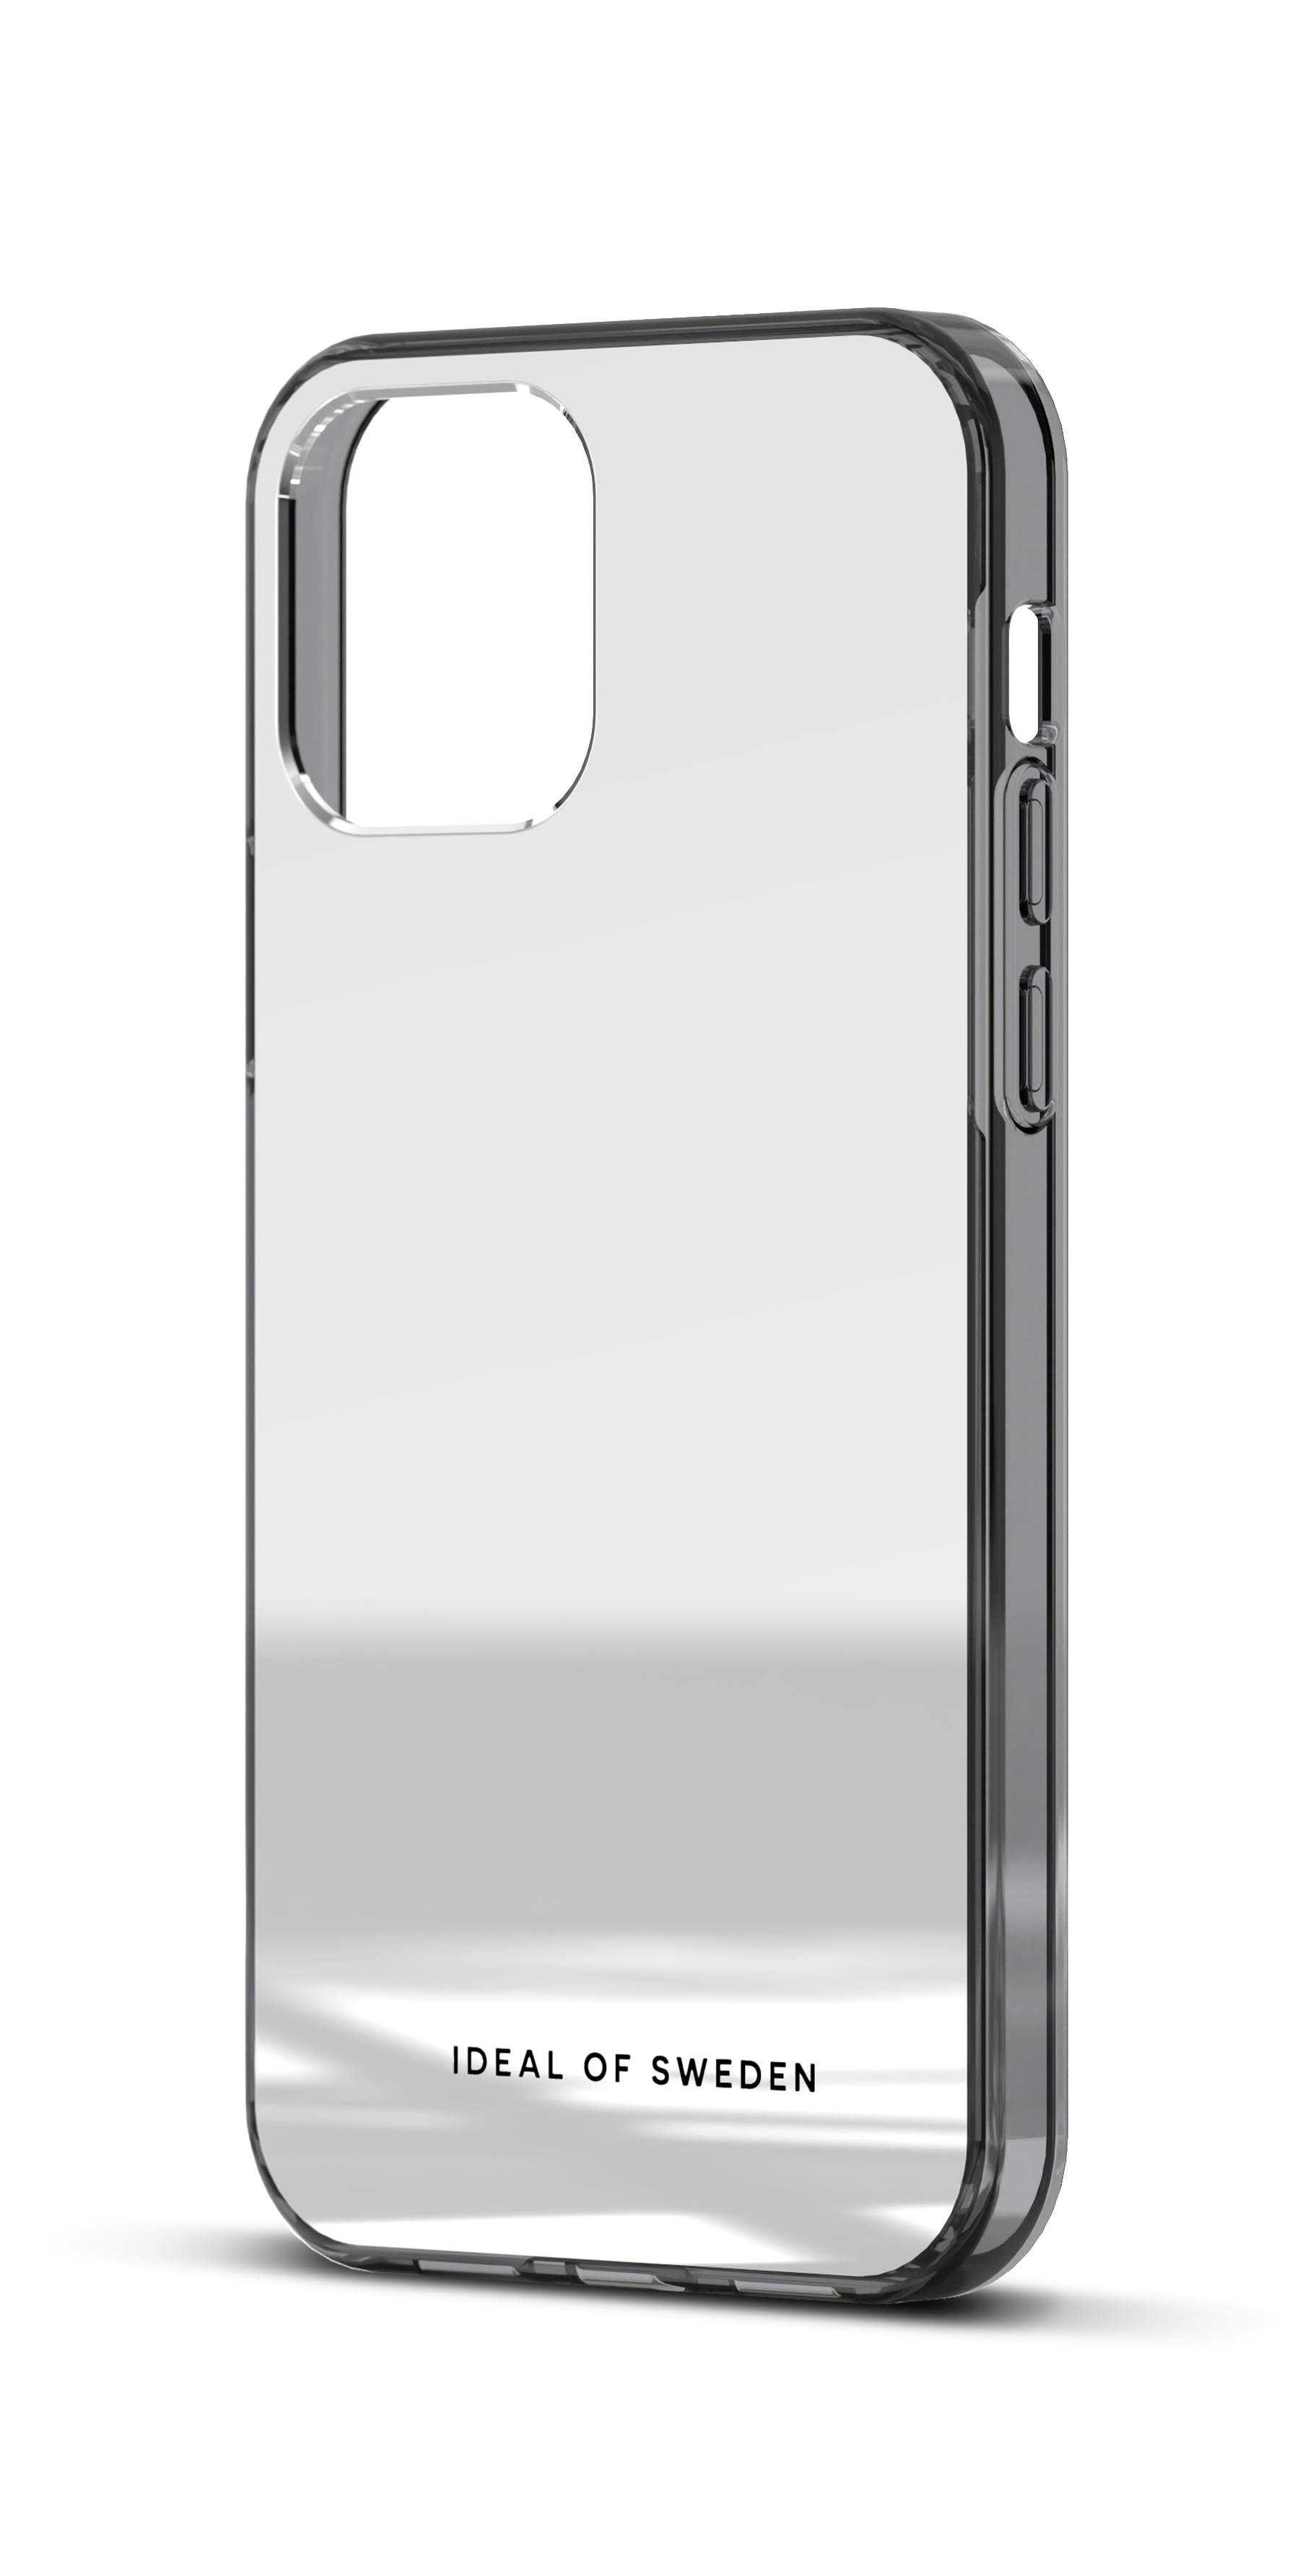 Mirror 12/12 Backcover, IDEAL SWEDEN OF Apple, Clear Case, Pro, iPhone